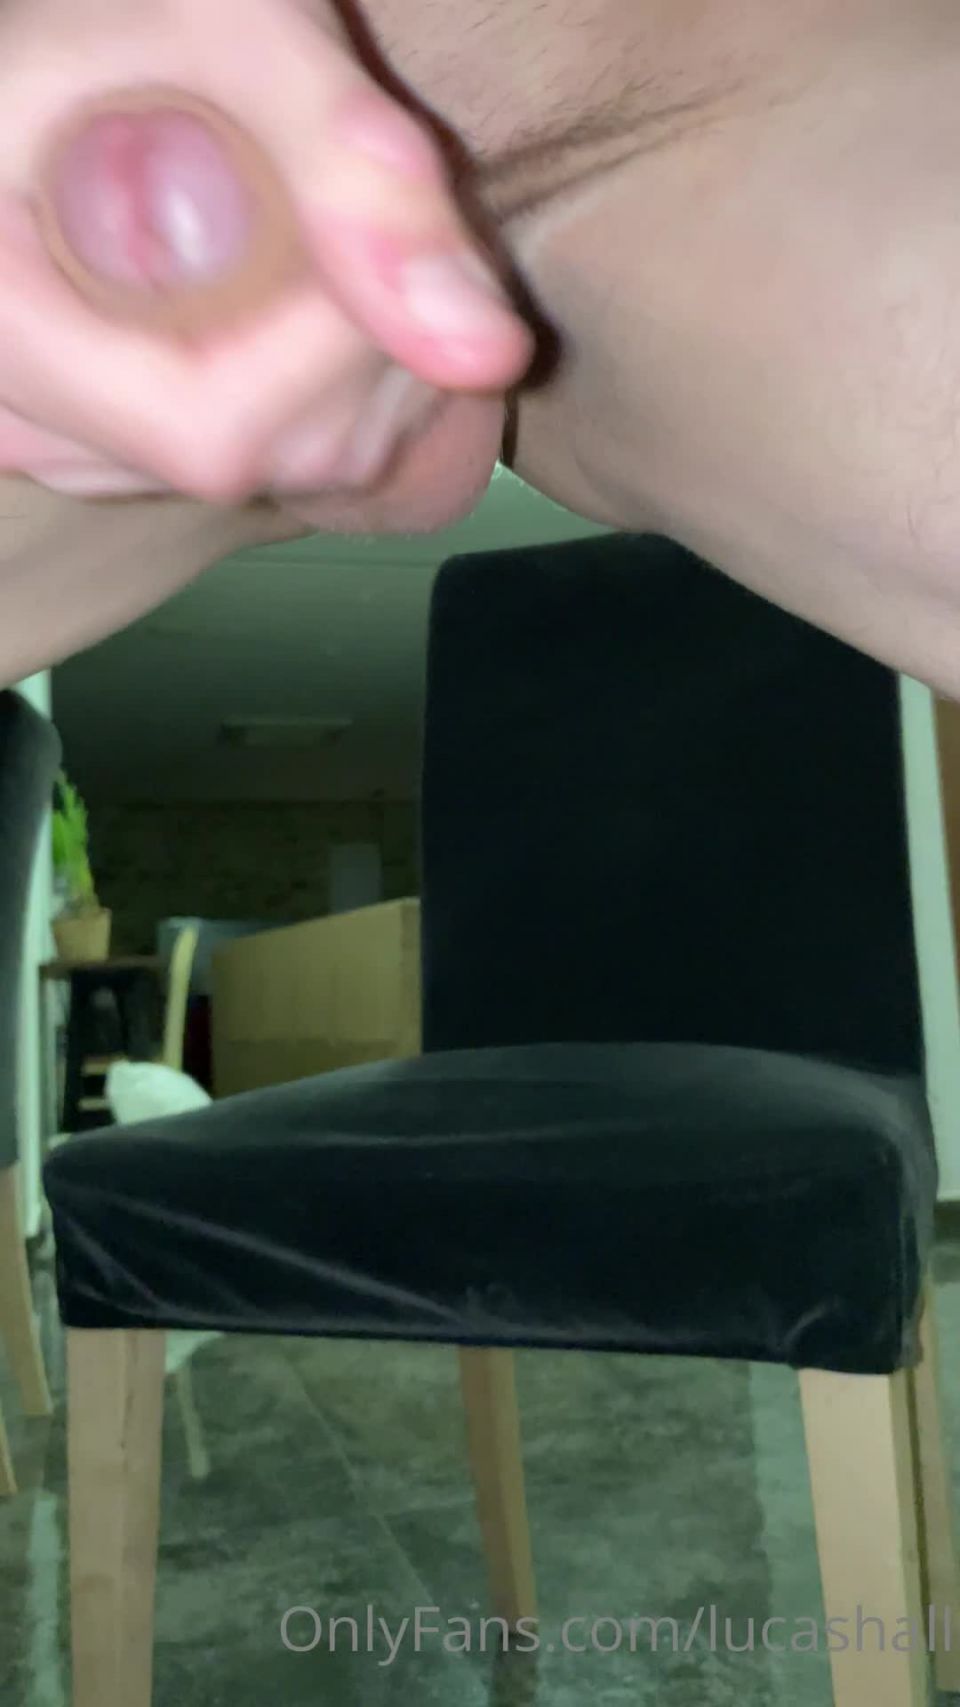 Lucas Hall () Lucashall - having some fun with the toy in my ass 19-12-2020